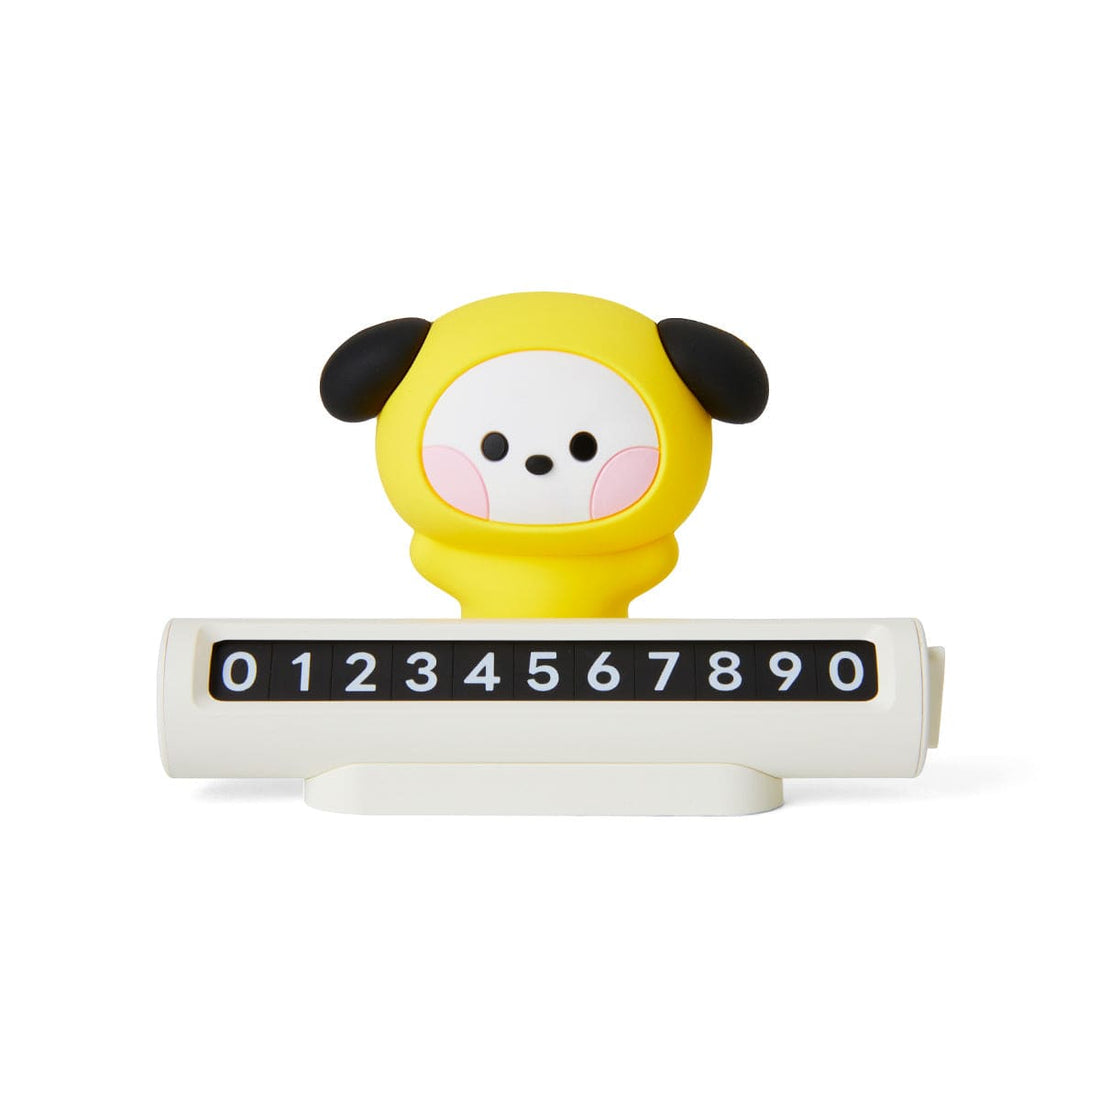 https://cdn.shopify.com/s/files/1/0513/1599/8919/products/line-friends-living-chimmy-bt21-chimmy-minini-parking-phone-number-plate-36701417734343.jpg?v=1673730158&width=1100